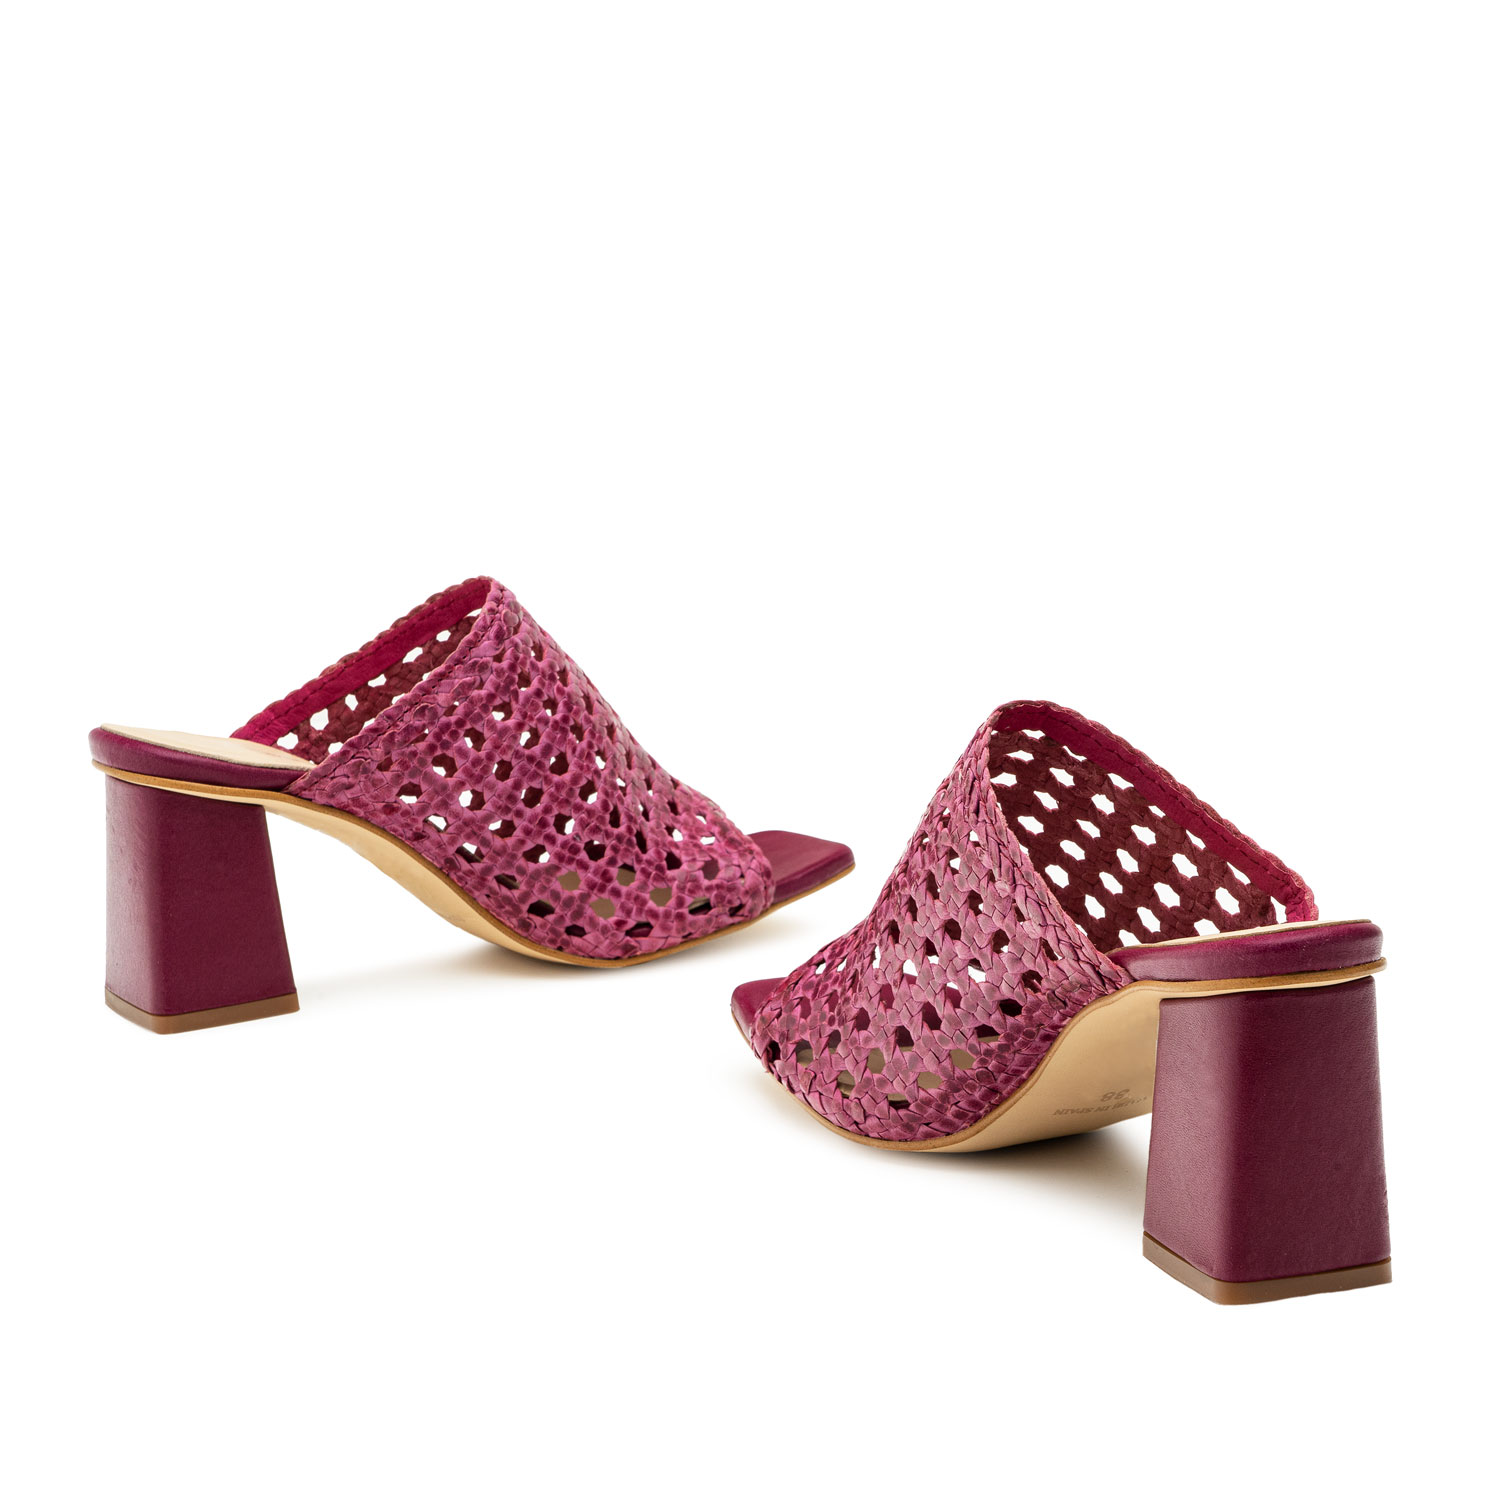 Braided Mules in Raspberry Leather 